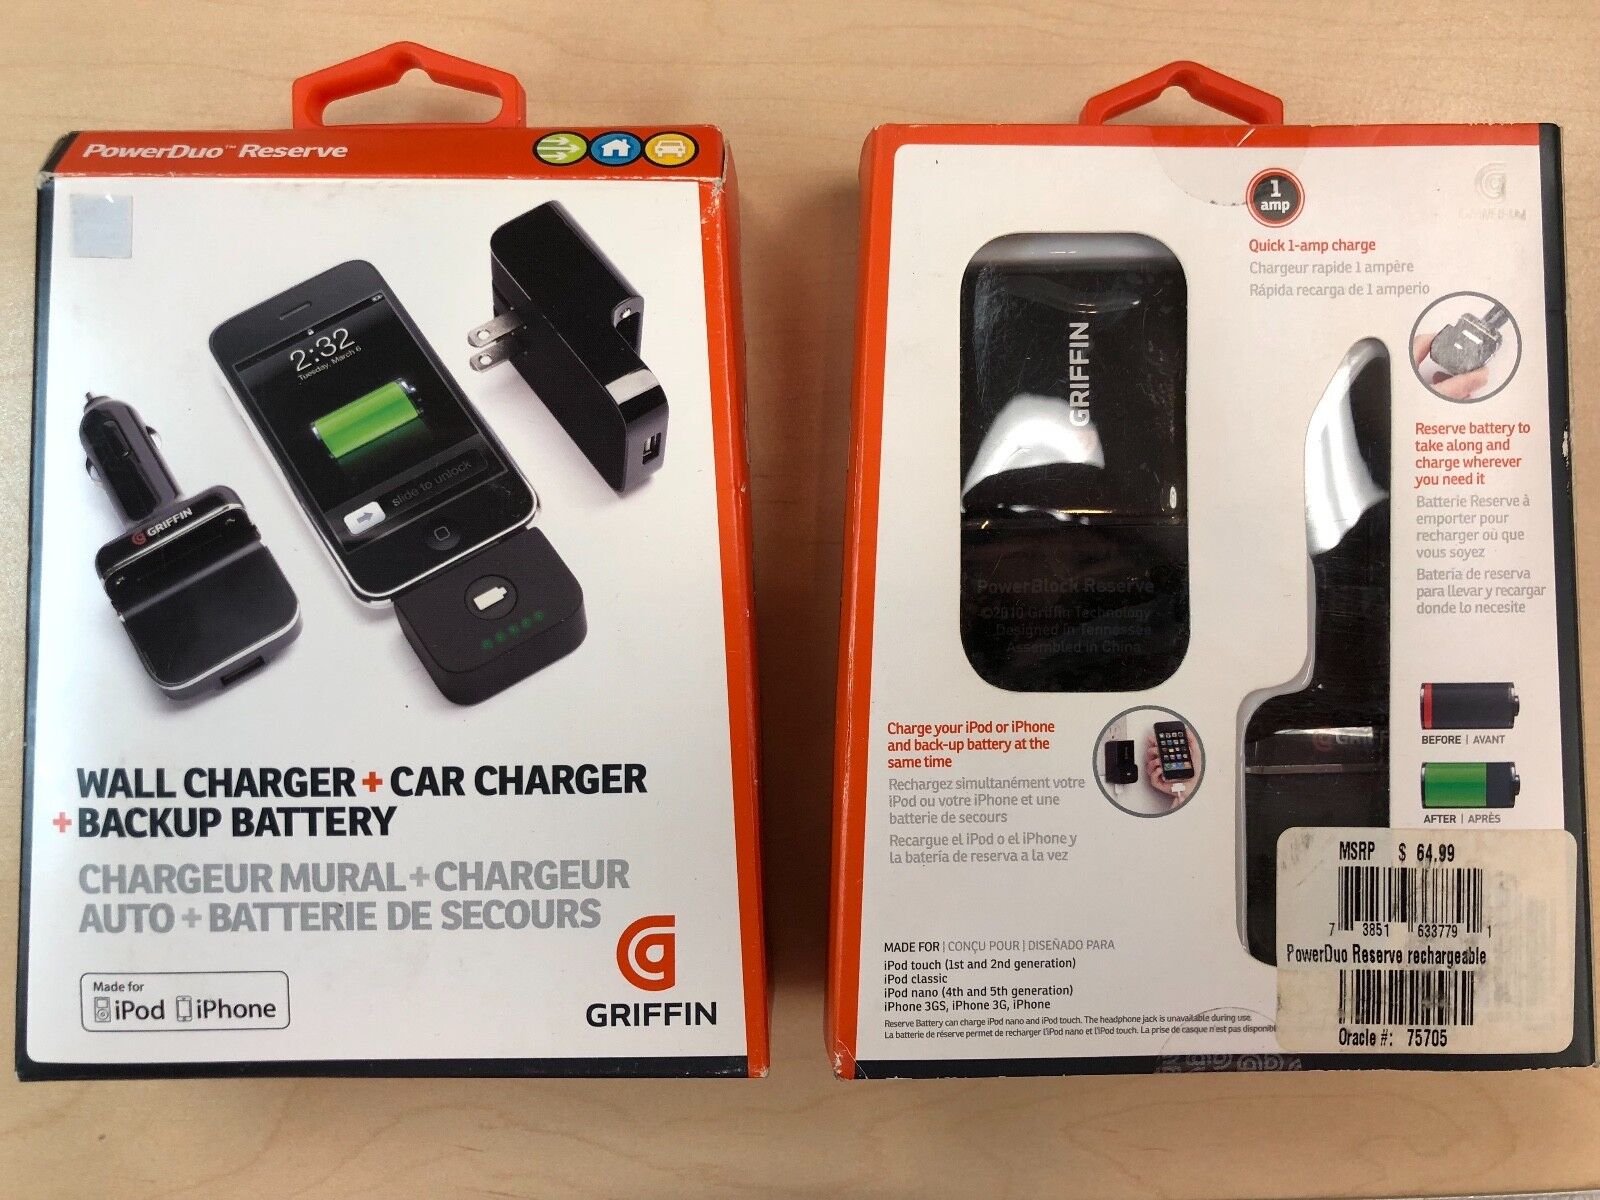 Griffin PowerDuo Reserve Car/Wall Charger/Backup Battery iPhone 4S 4 3G 3GS iPod